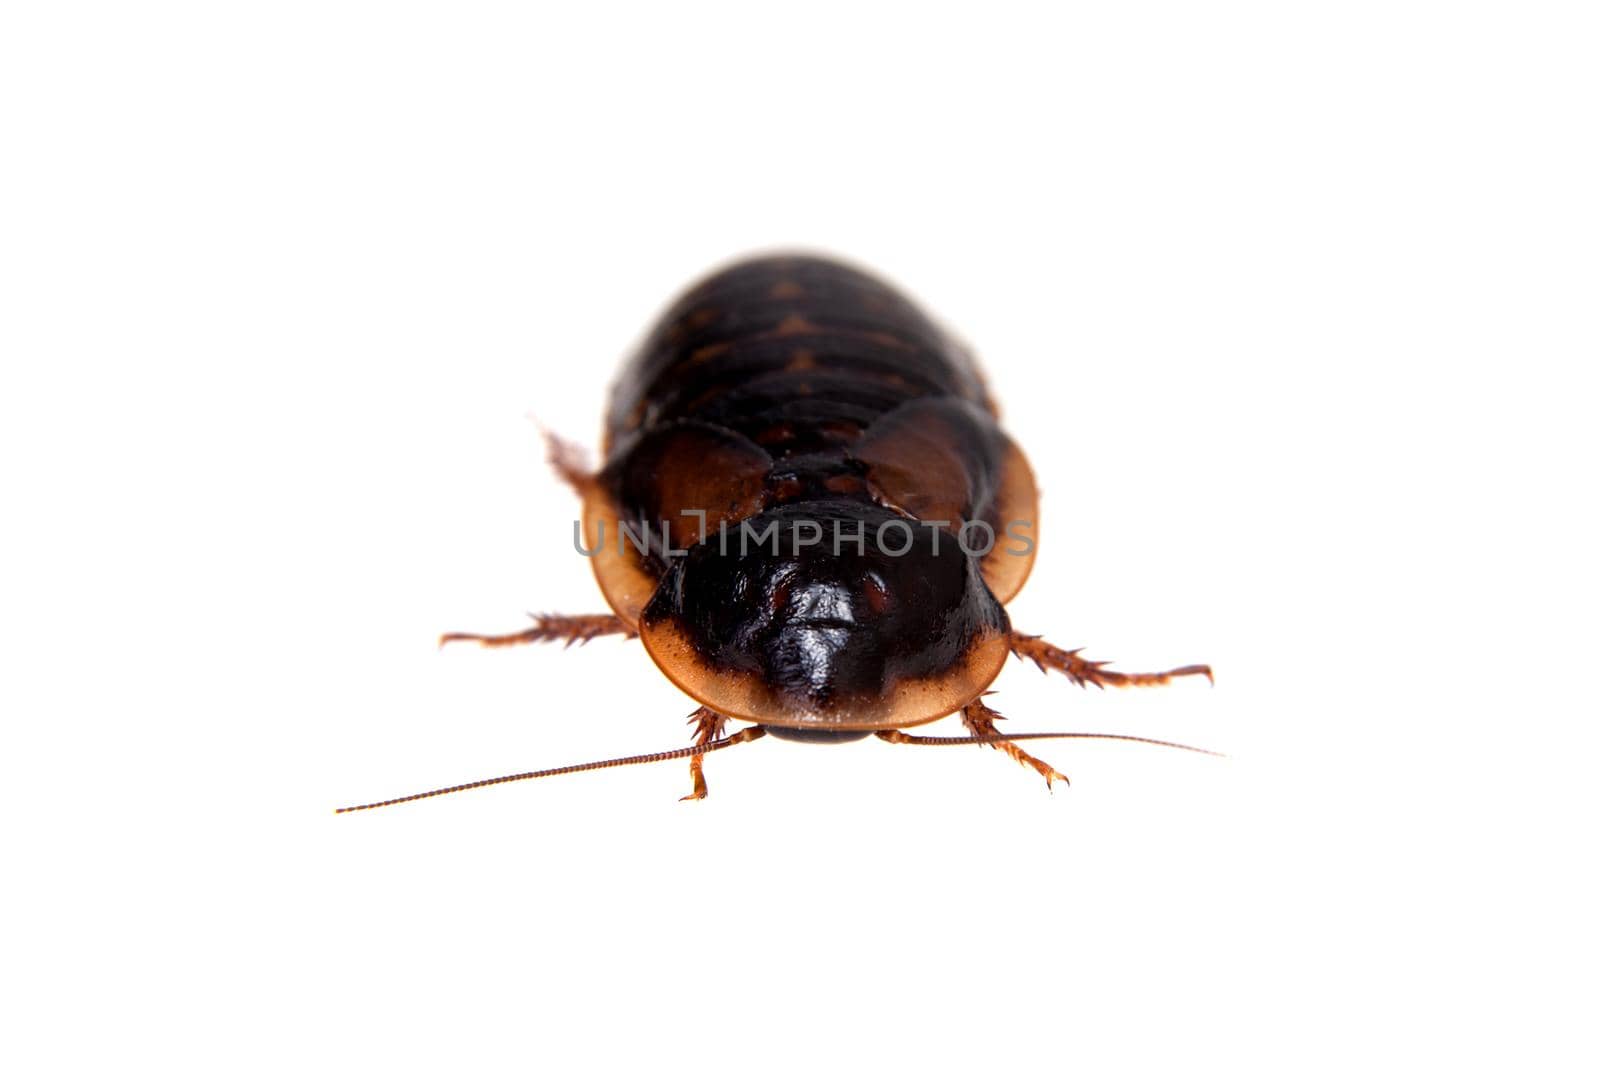 The Dubia roach or Argentinian wood roach, Blaptica dubia, isolated on white background